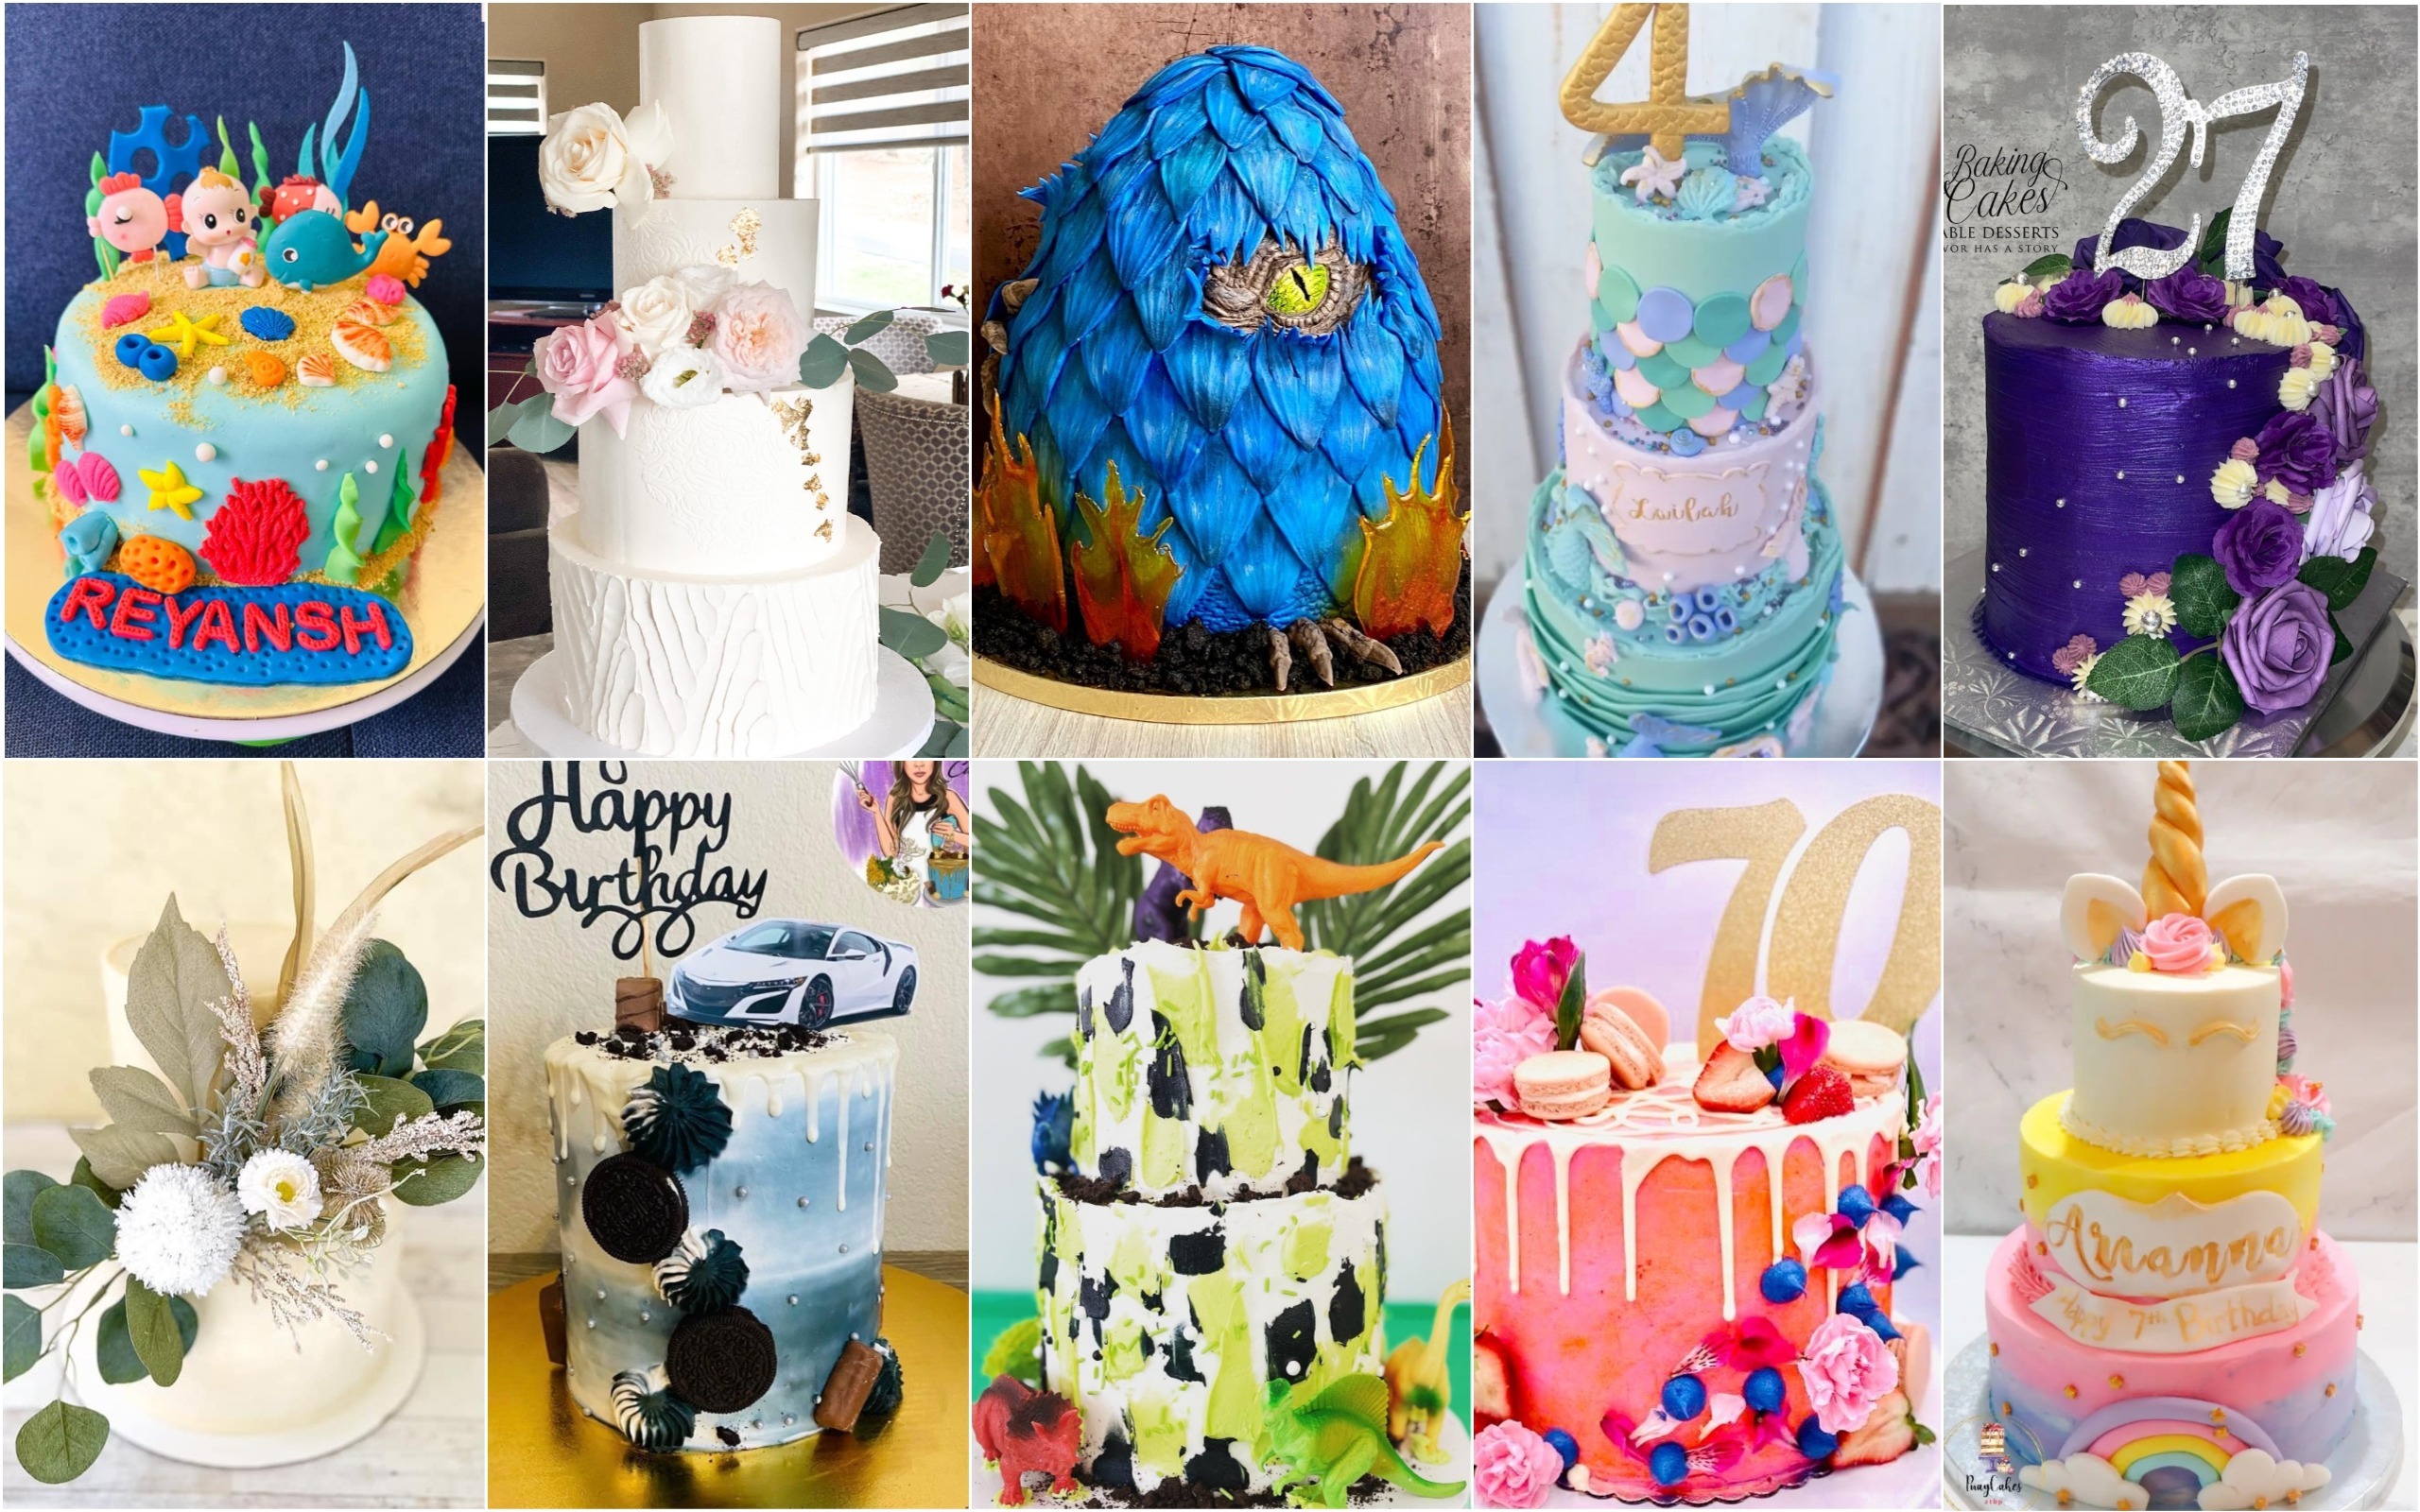 2-Tier Painter Theme Cake – Cakes All The Way